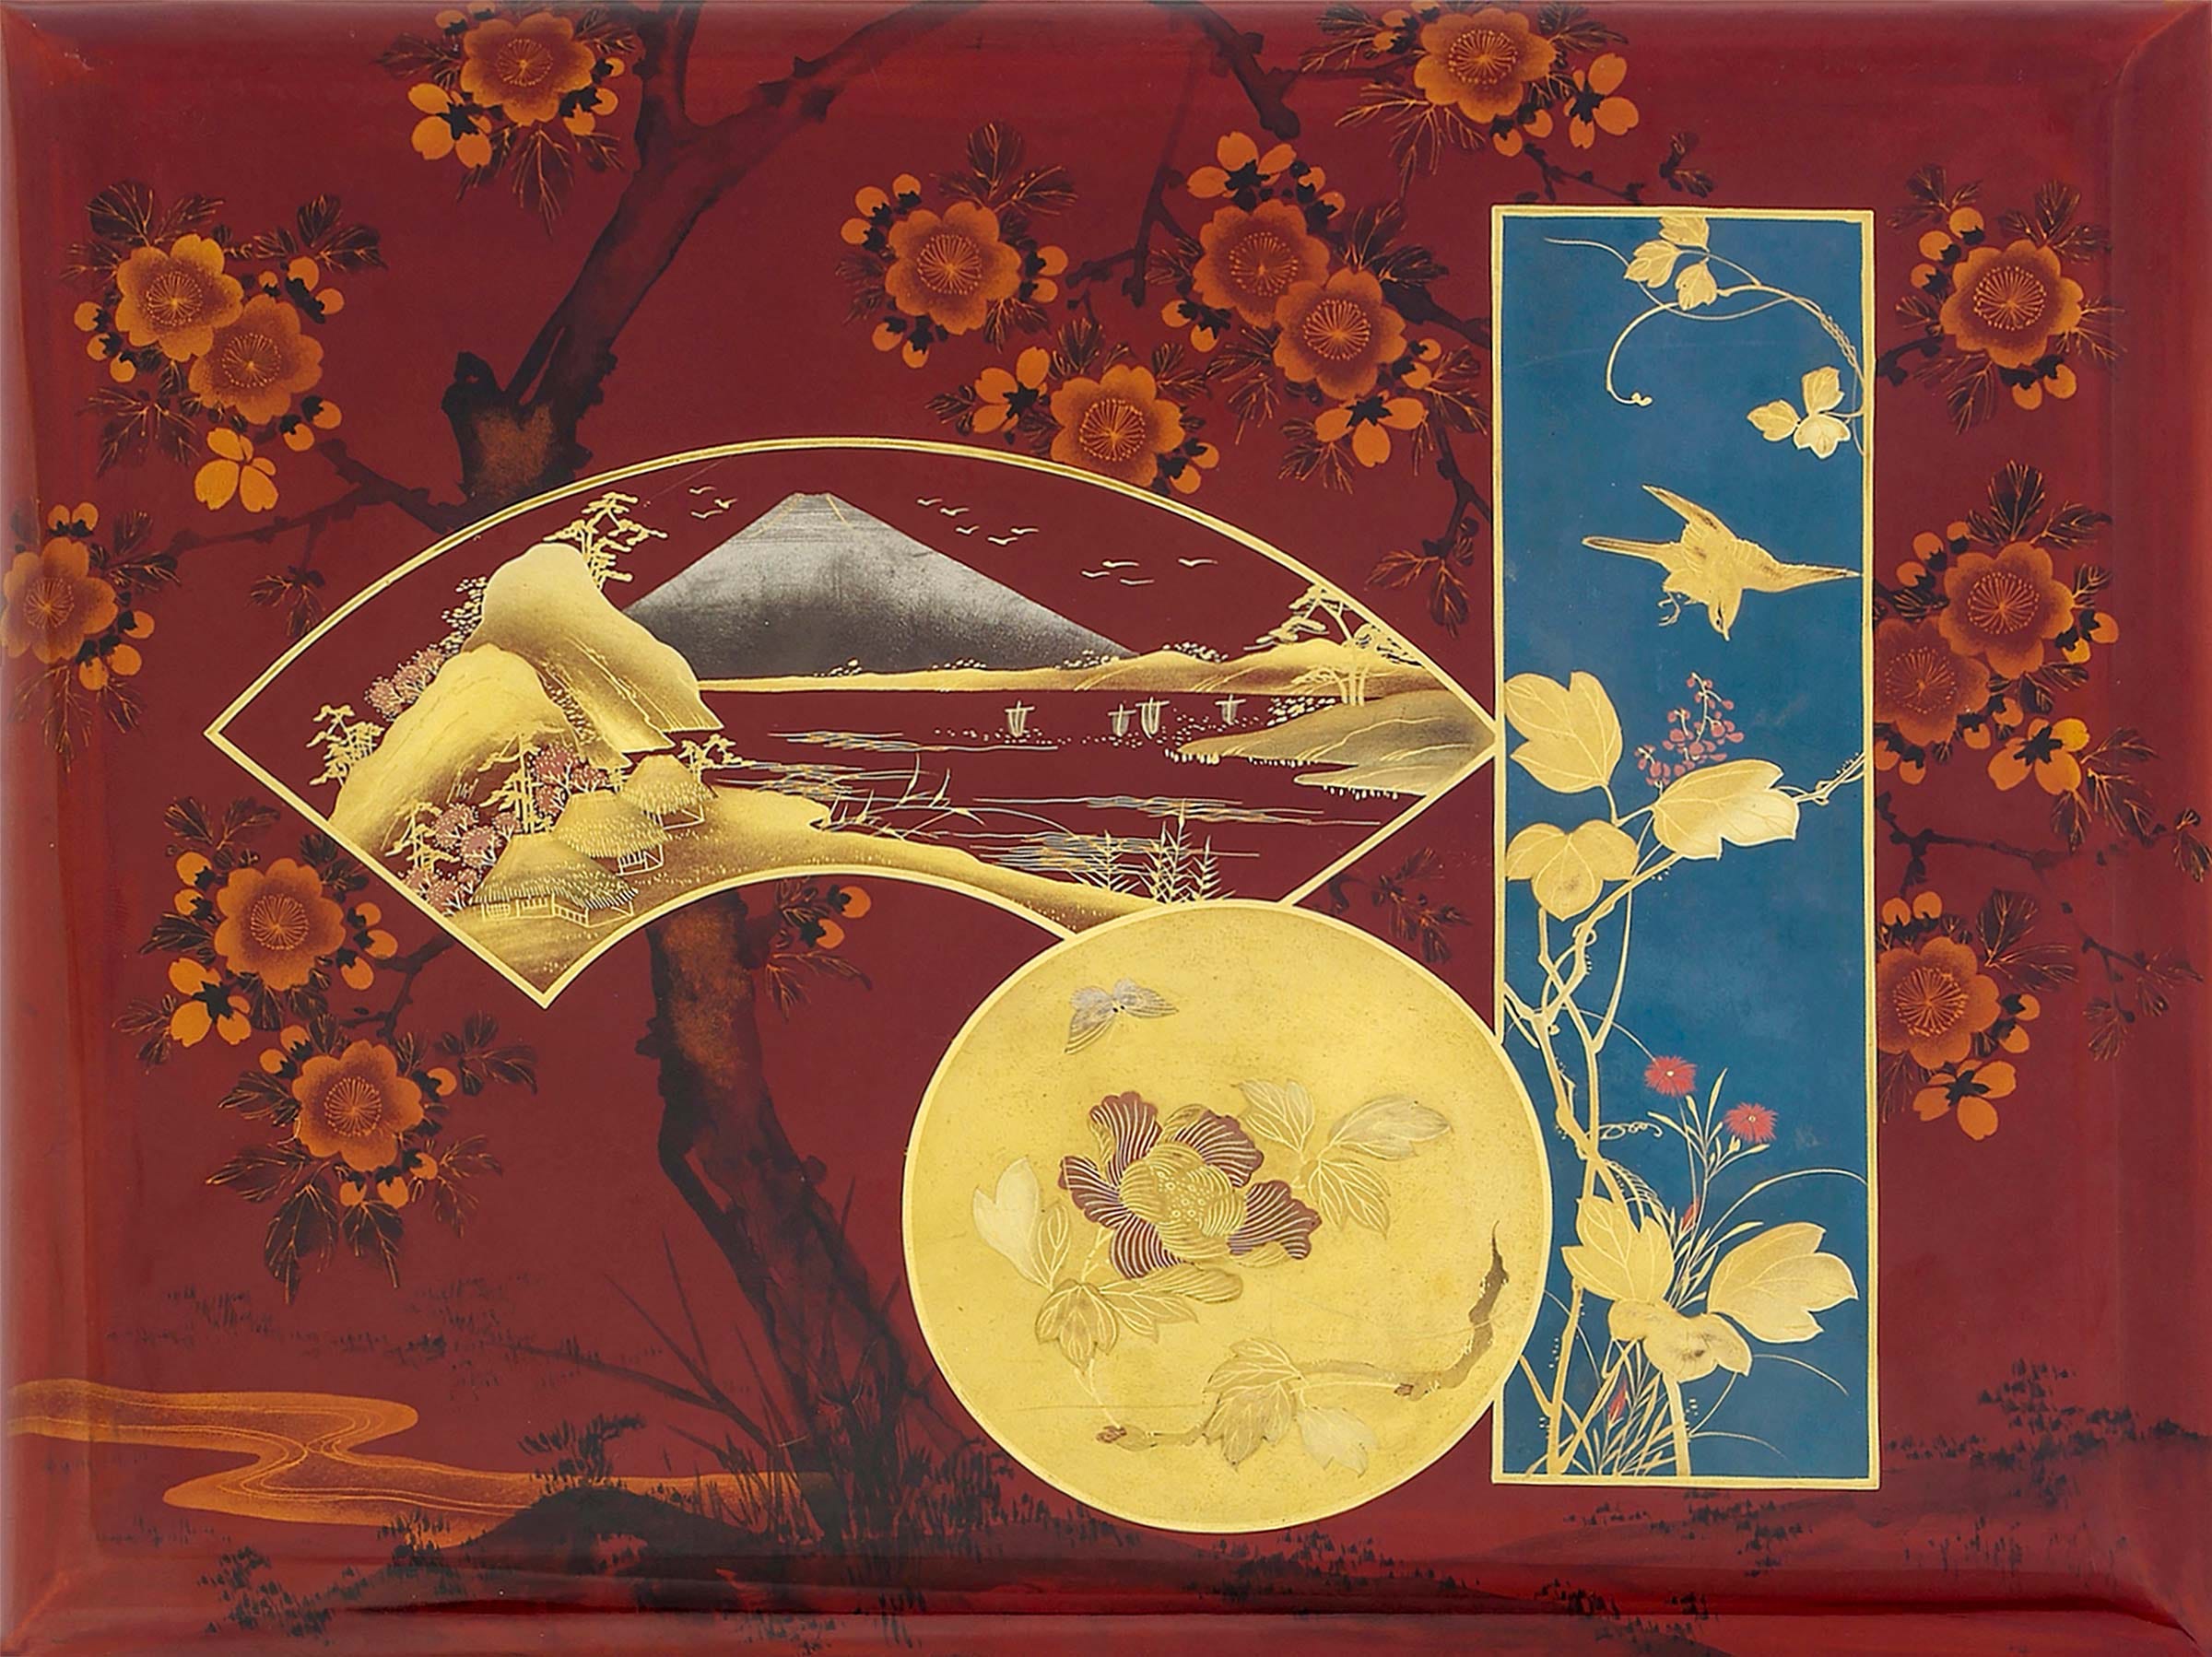 Lacquered cover of a late 19th century Japanese photo album